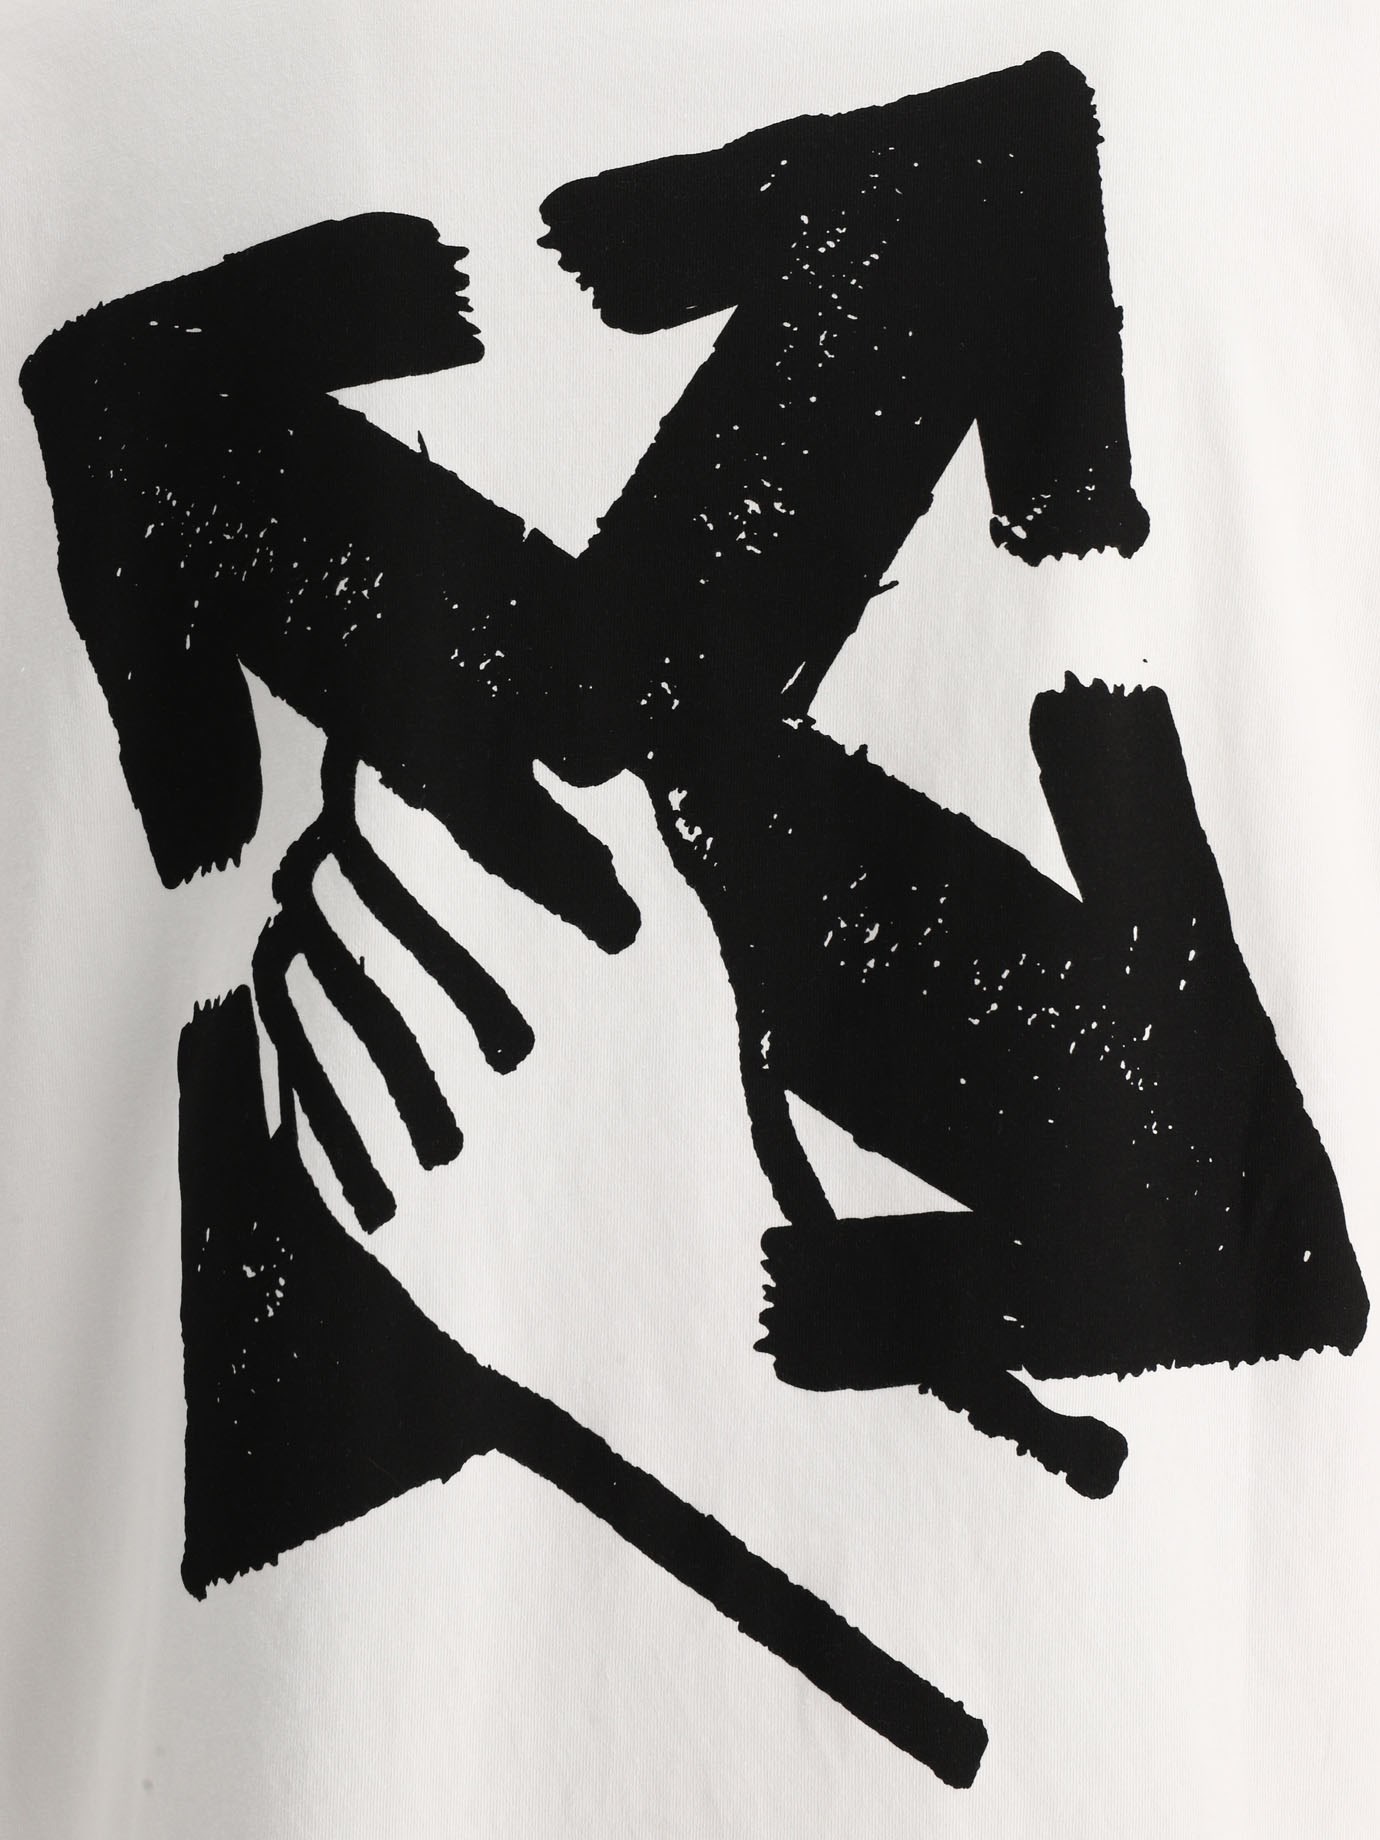 T-shirt  Hand Arrow  by Off-White